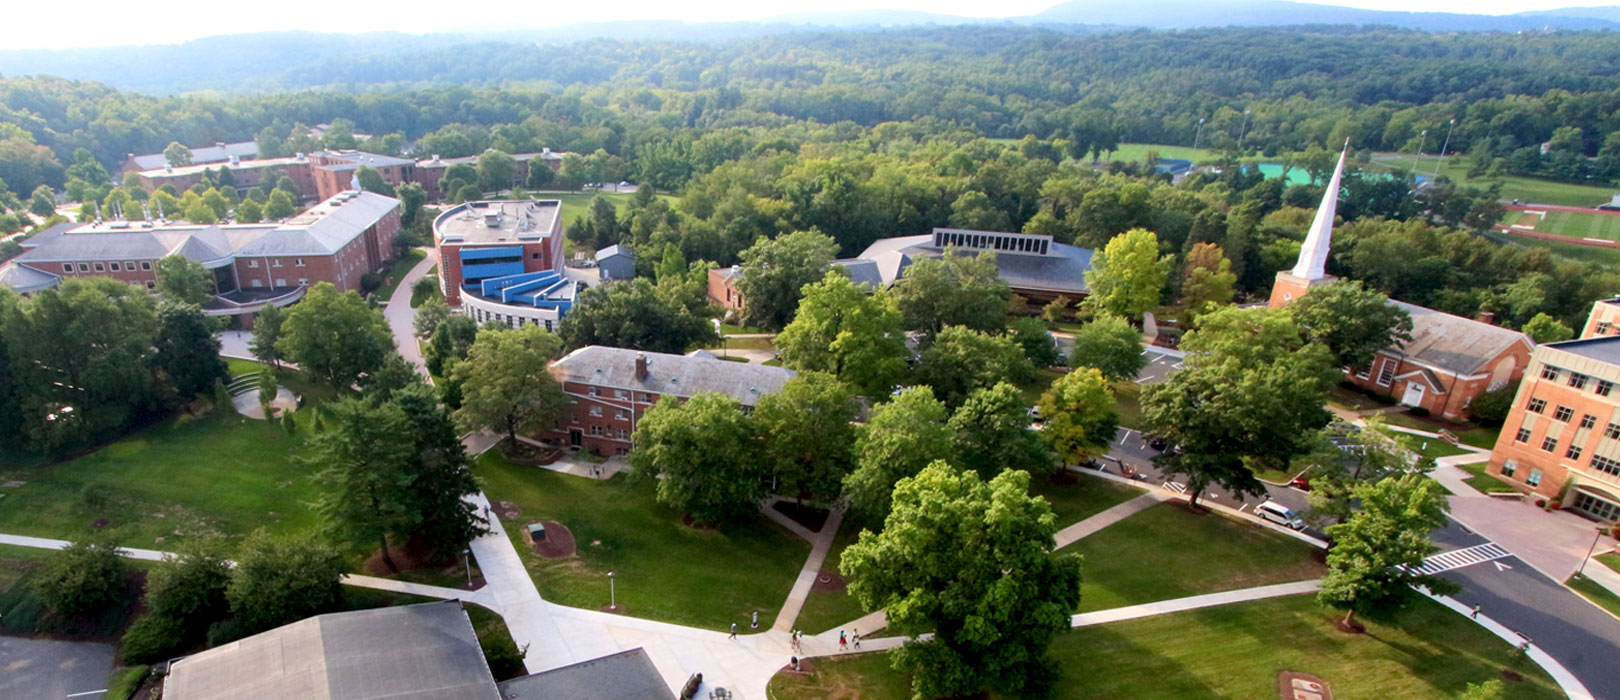 Campus photography from above